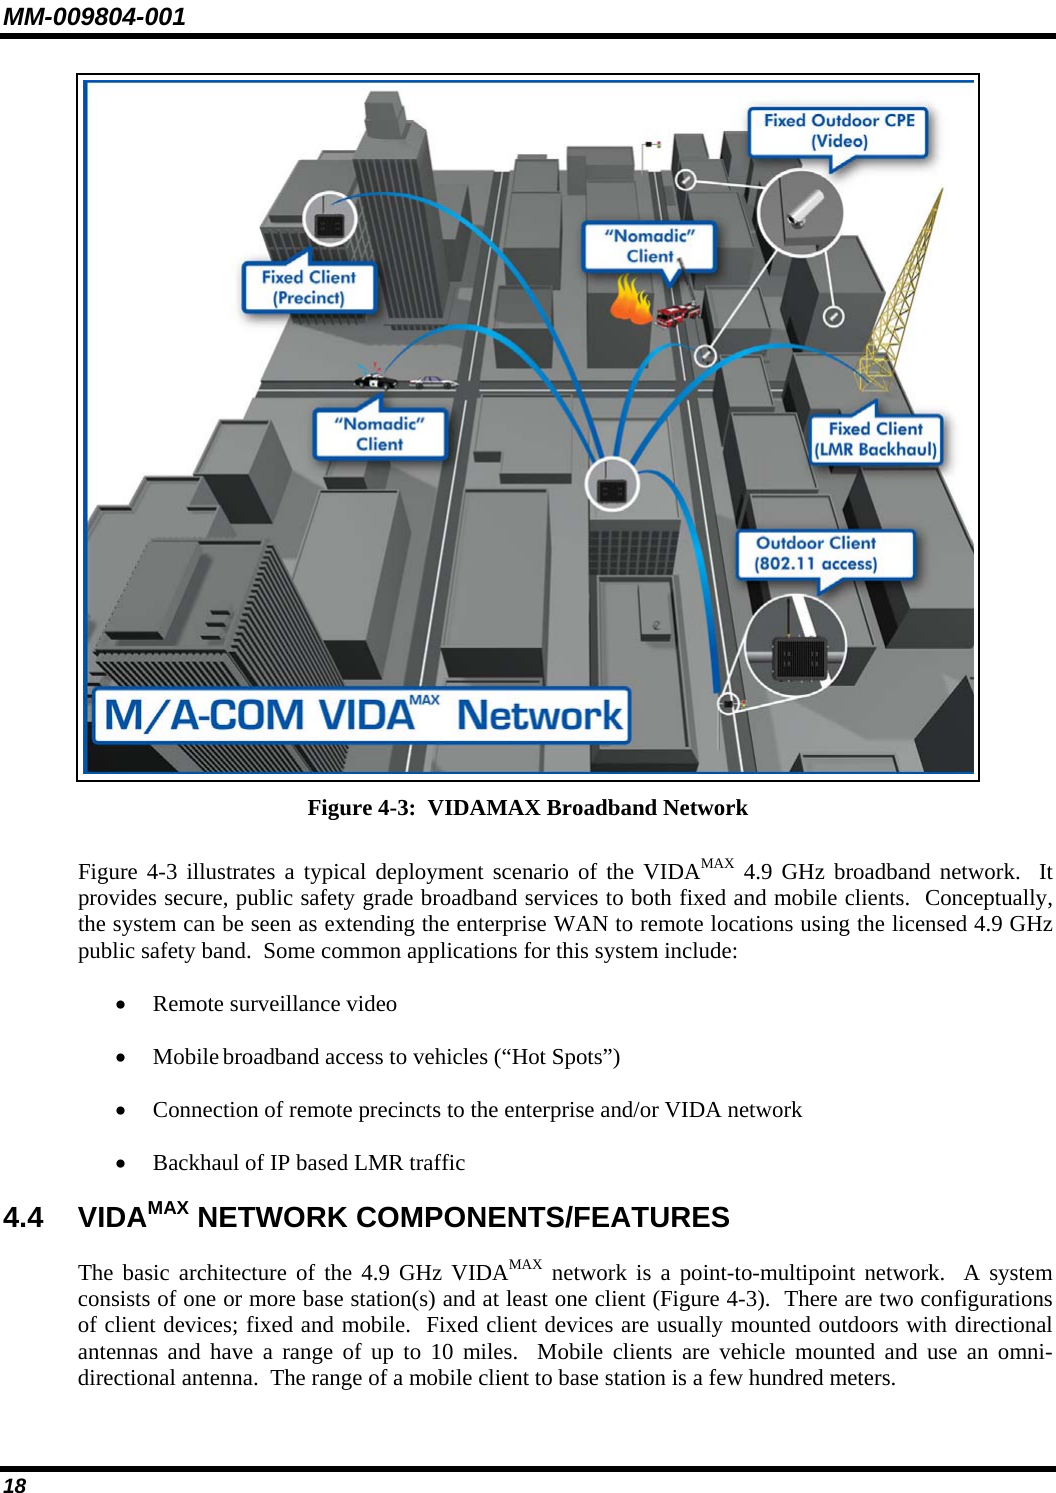 MM-009804-001  Figure 4-3:  VIDAMAX Broadband Network  Figure 4-3 illustrates a typical deployment scenario of the VIDAMAX 4.9 GHz broadband network.  It provides secure, public safety grade broadband services to both fixed and mobile clients.  Conceptually, the system can be seen as extending the enterprise WAN to remote locations using the licensed 4.9 GHz public safety band.  Some common applications for this system include: • Remote surveillance video • Mobile broadband access to vehicles (“Hot Spots”) • Connection of remote precincts to the enterprise and/or VIDA network • Backhaul of IP based LMR traffic  4.4 VIDAMAX NETWORK COMPONENTS/FEATURES The basic architecture of the 4.9 GHz VIDAMAX network is a point-to-multipoint network.  A system consists of one or more base station(s) and at least one client (Figure 4-3).  There are two configurations of client devices; fixed and mobile.  Fixed client devices are usually mounted outdoors with directional antennas and have a range of up to 10 miles.  Mobile clients are vehicle mounted and use an omni-directional antenna.  The range of a mobile client to base station is a few hundred meters. 18 